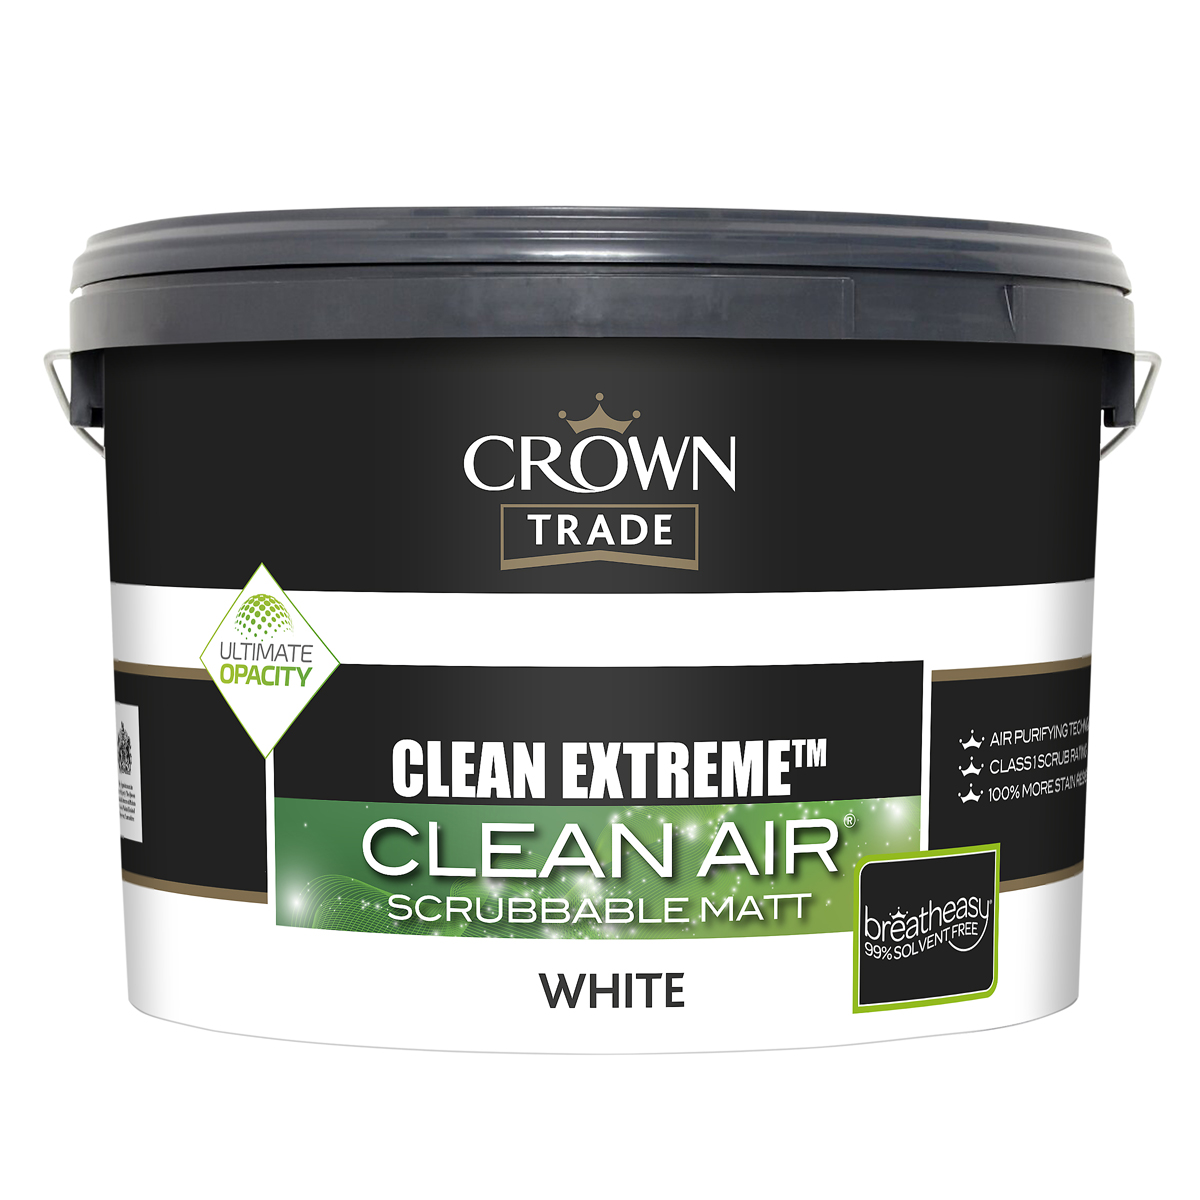 https://labmonline.co.uk/wp-content/uploads/2023/07/5097350-Crown-Trade-Clean-Extreme-Clean-Air-White-LR.jpg